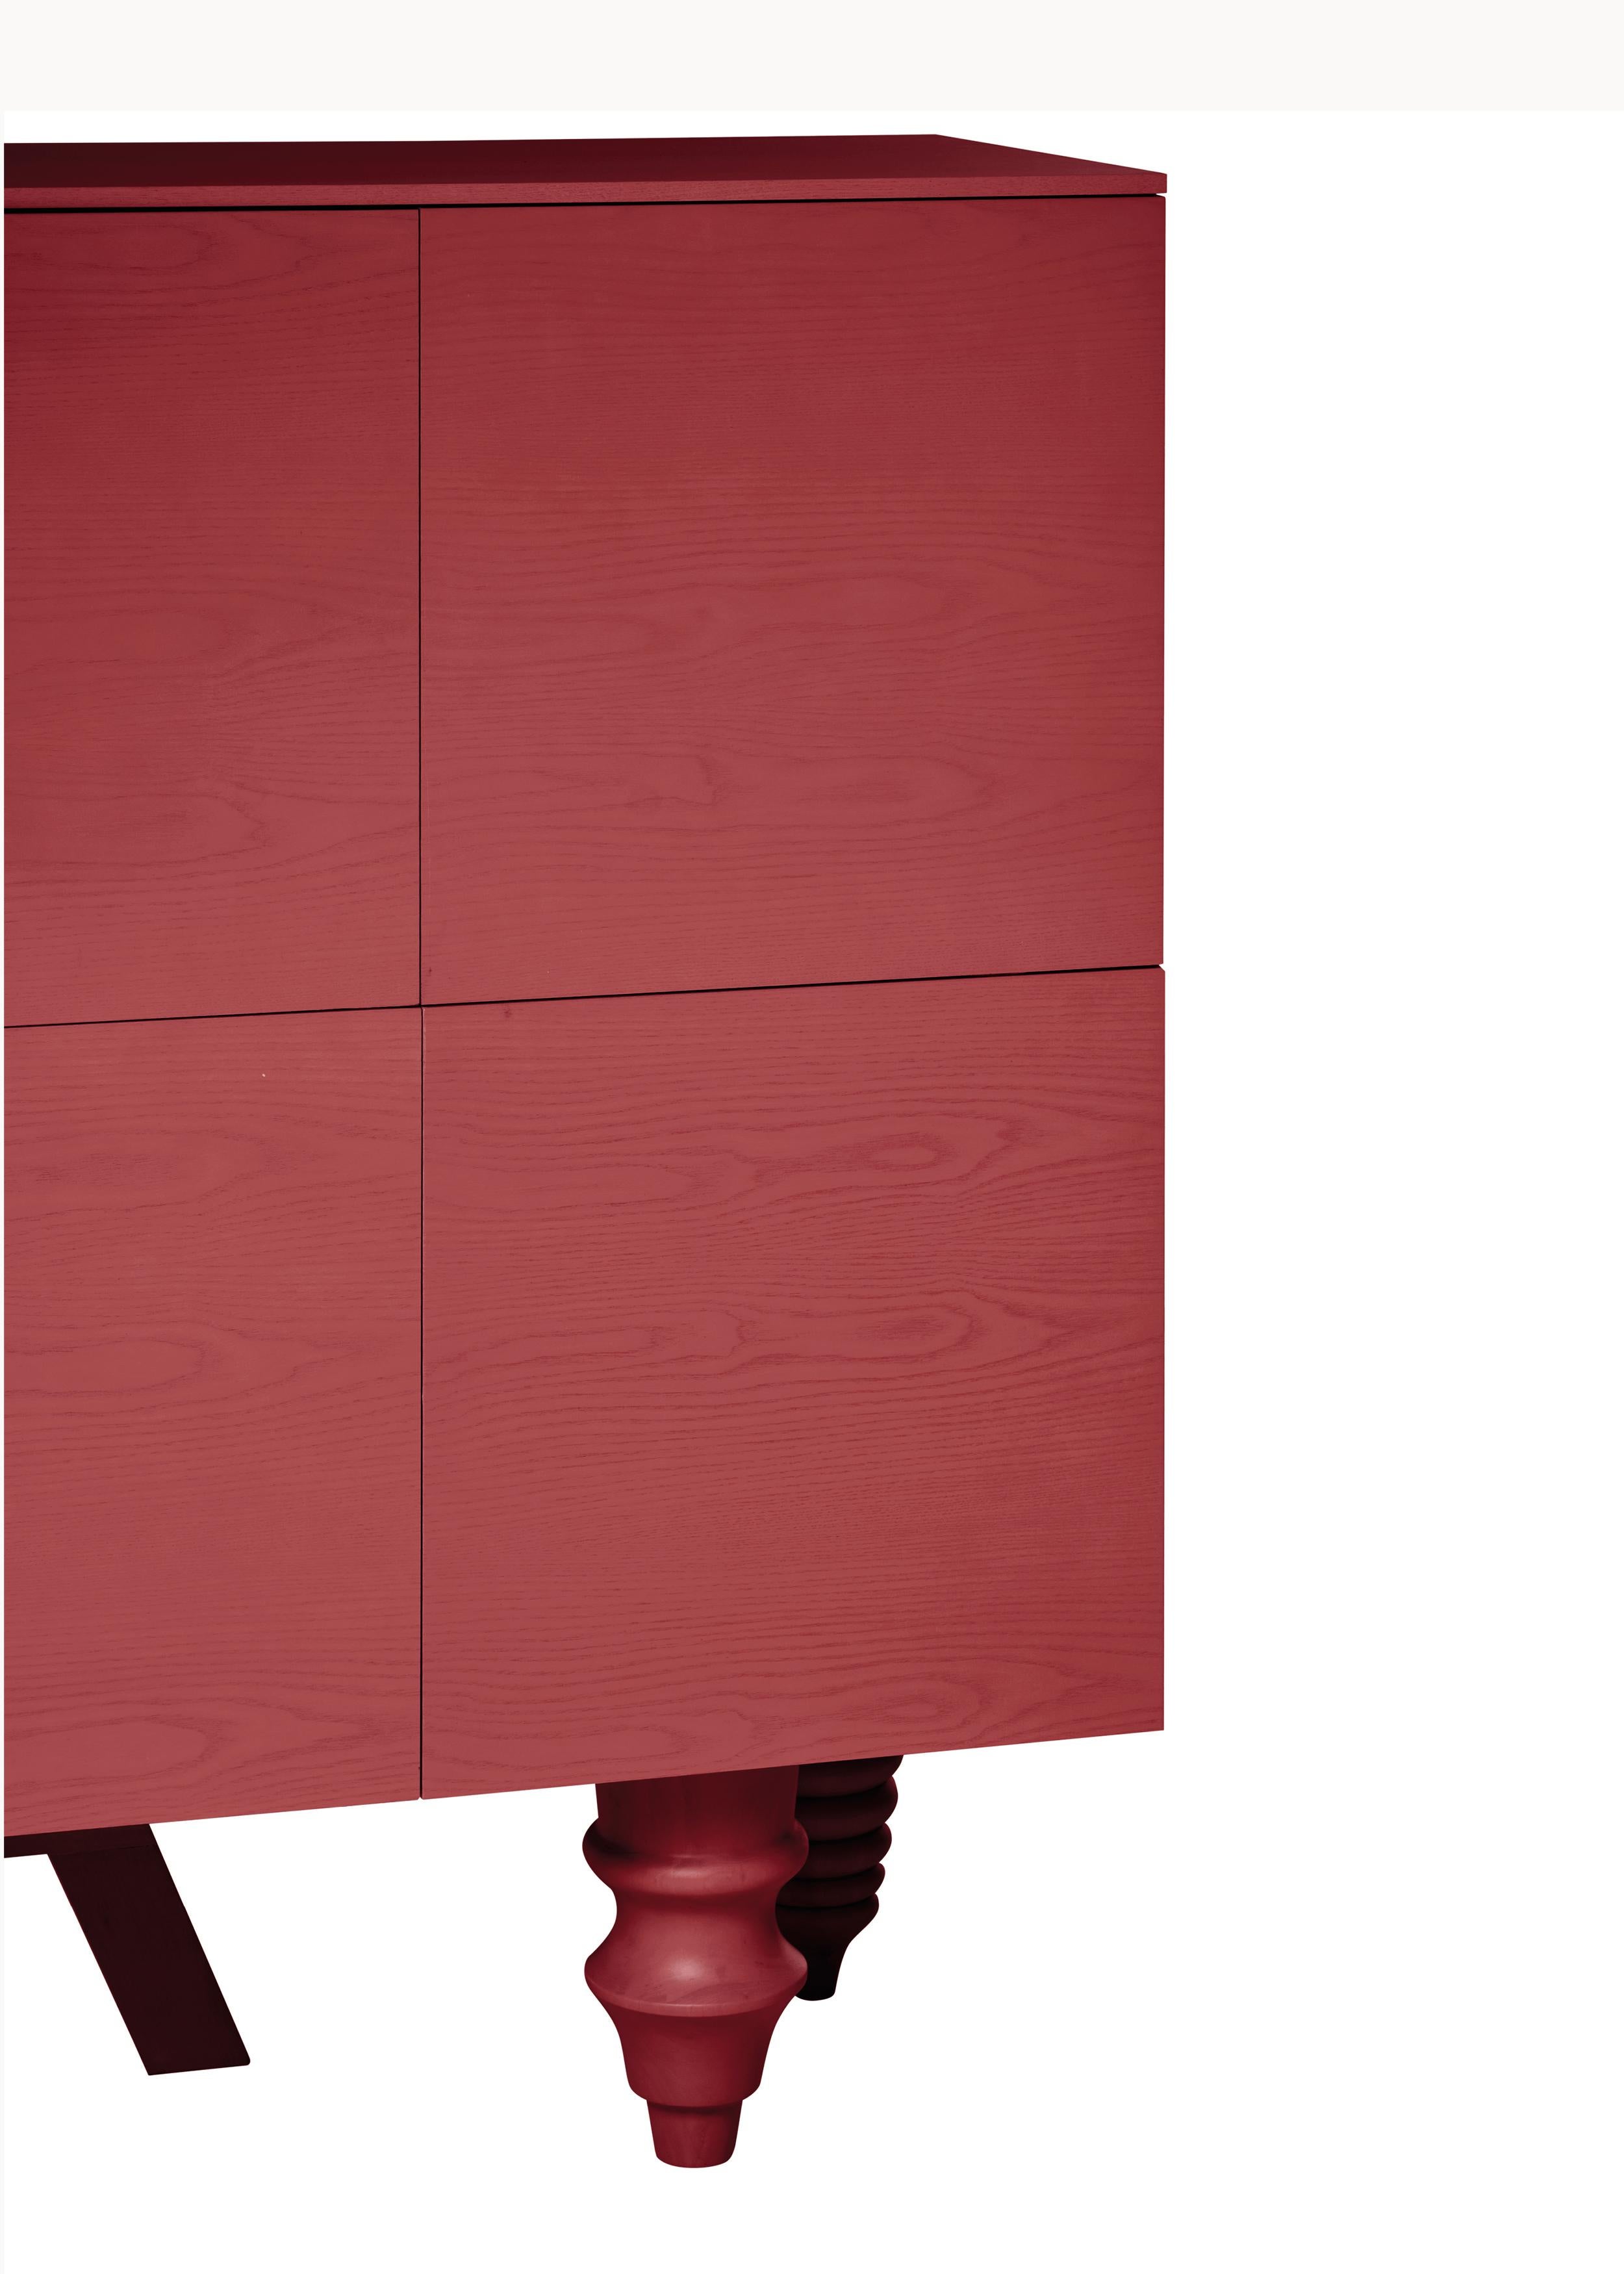 Glass Contemporary Cabinet 'Multileg' by Jaime Hayon, Ash Top, Red, 100 cm For Sale